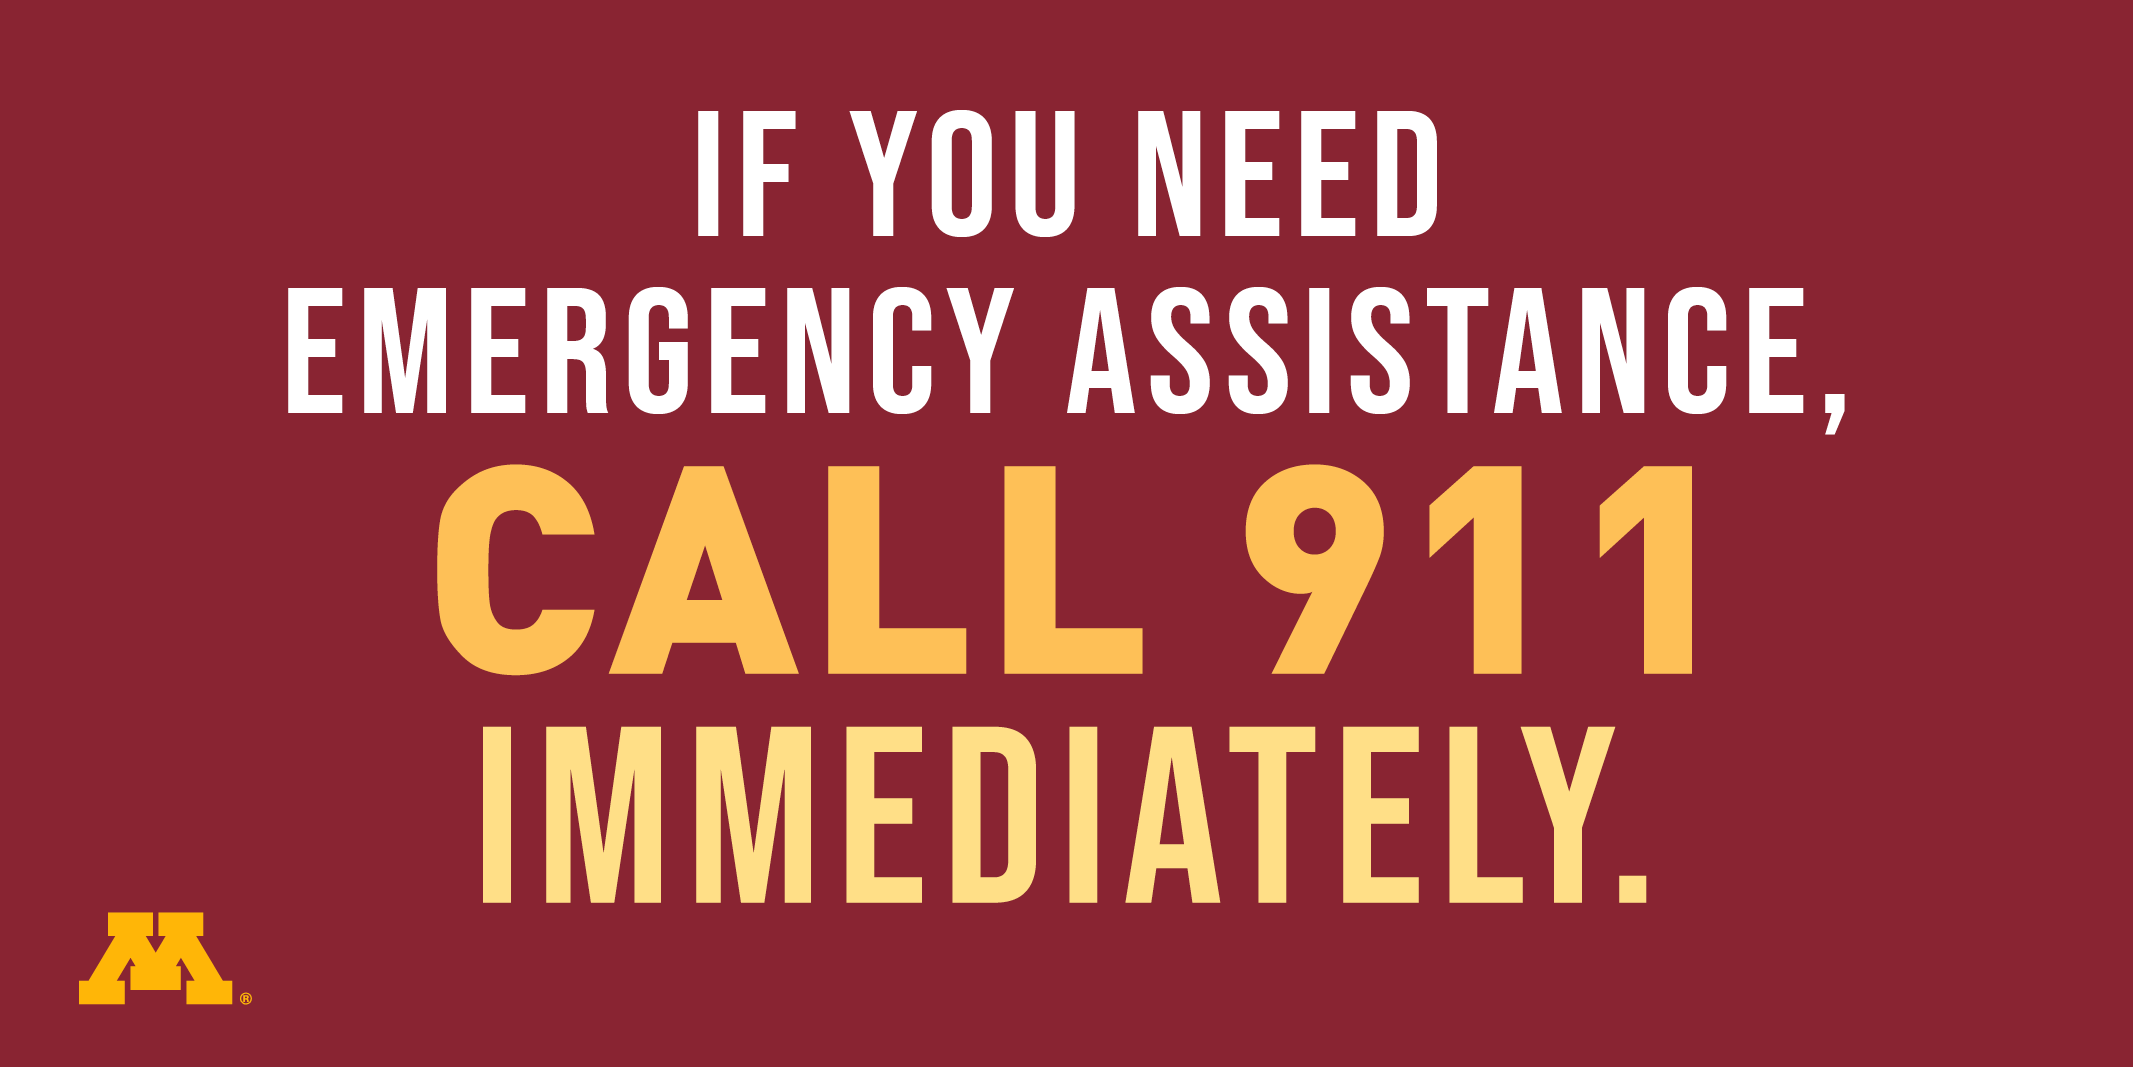 If you need emergency assistance, call 911 immediately.